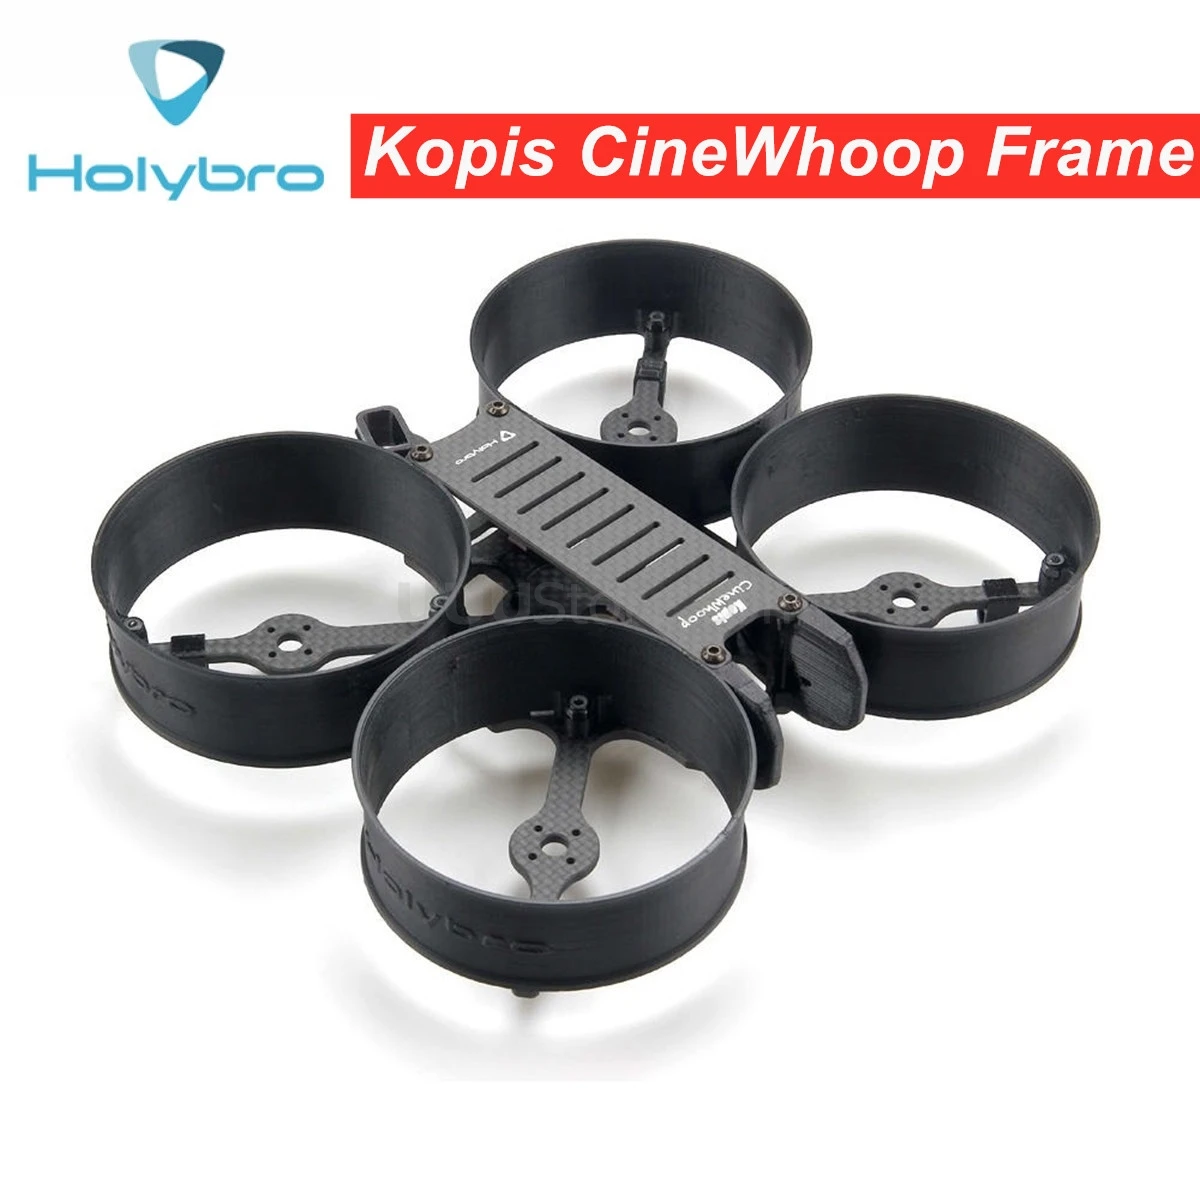 

Holybro Kopis CineWhoop Frame 149mm 3 Inch For Air Unit FPV Racing RC Drone MultiRotor Multicopter Parts Accessories